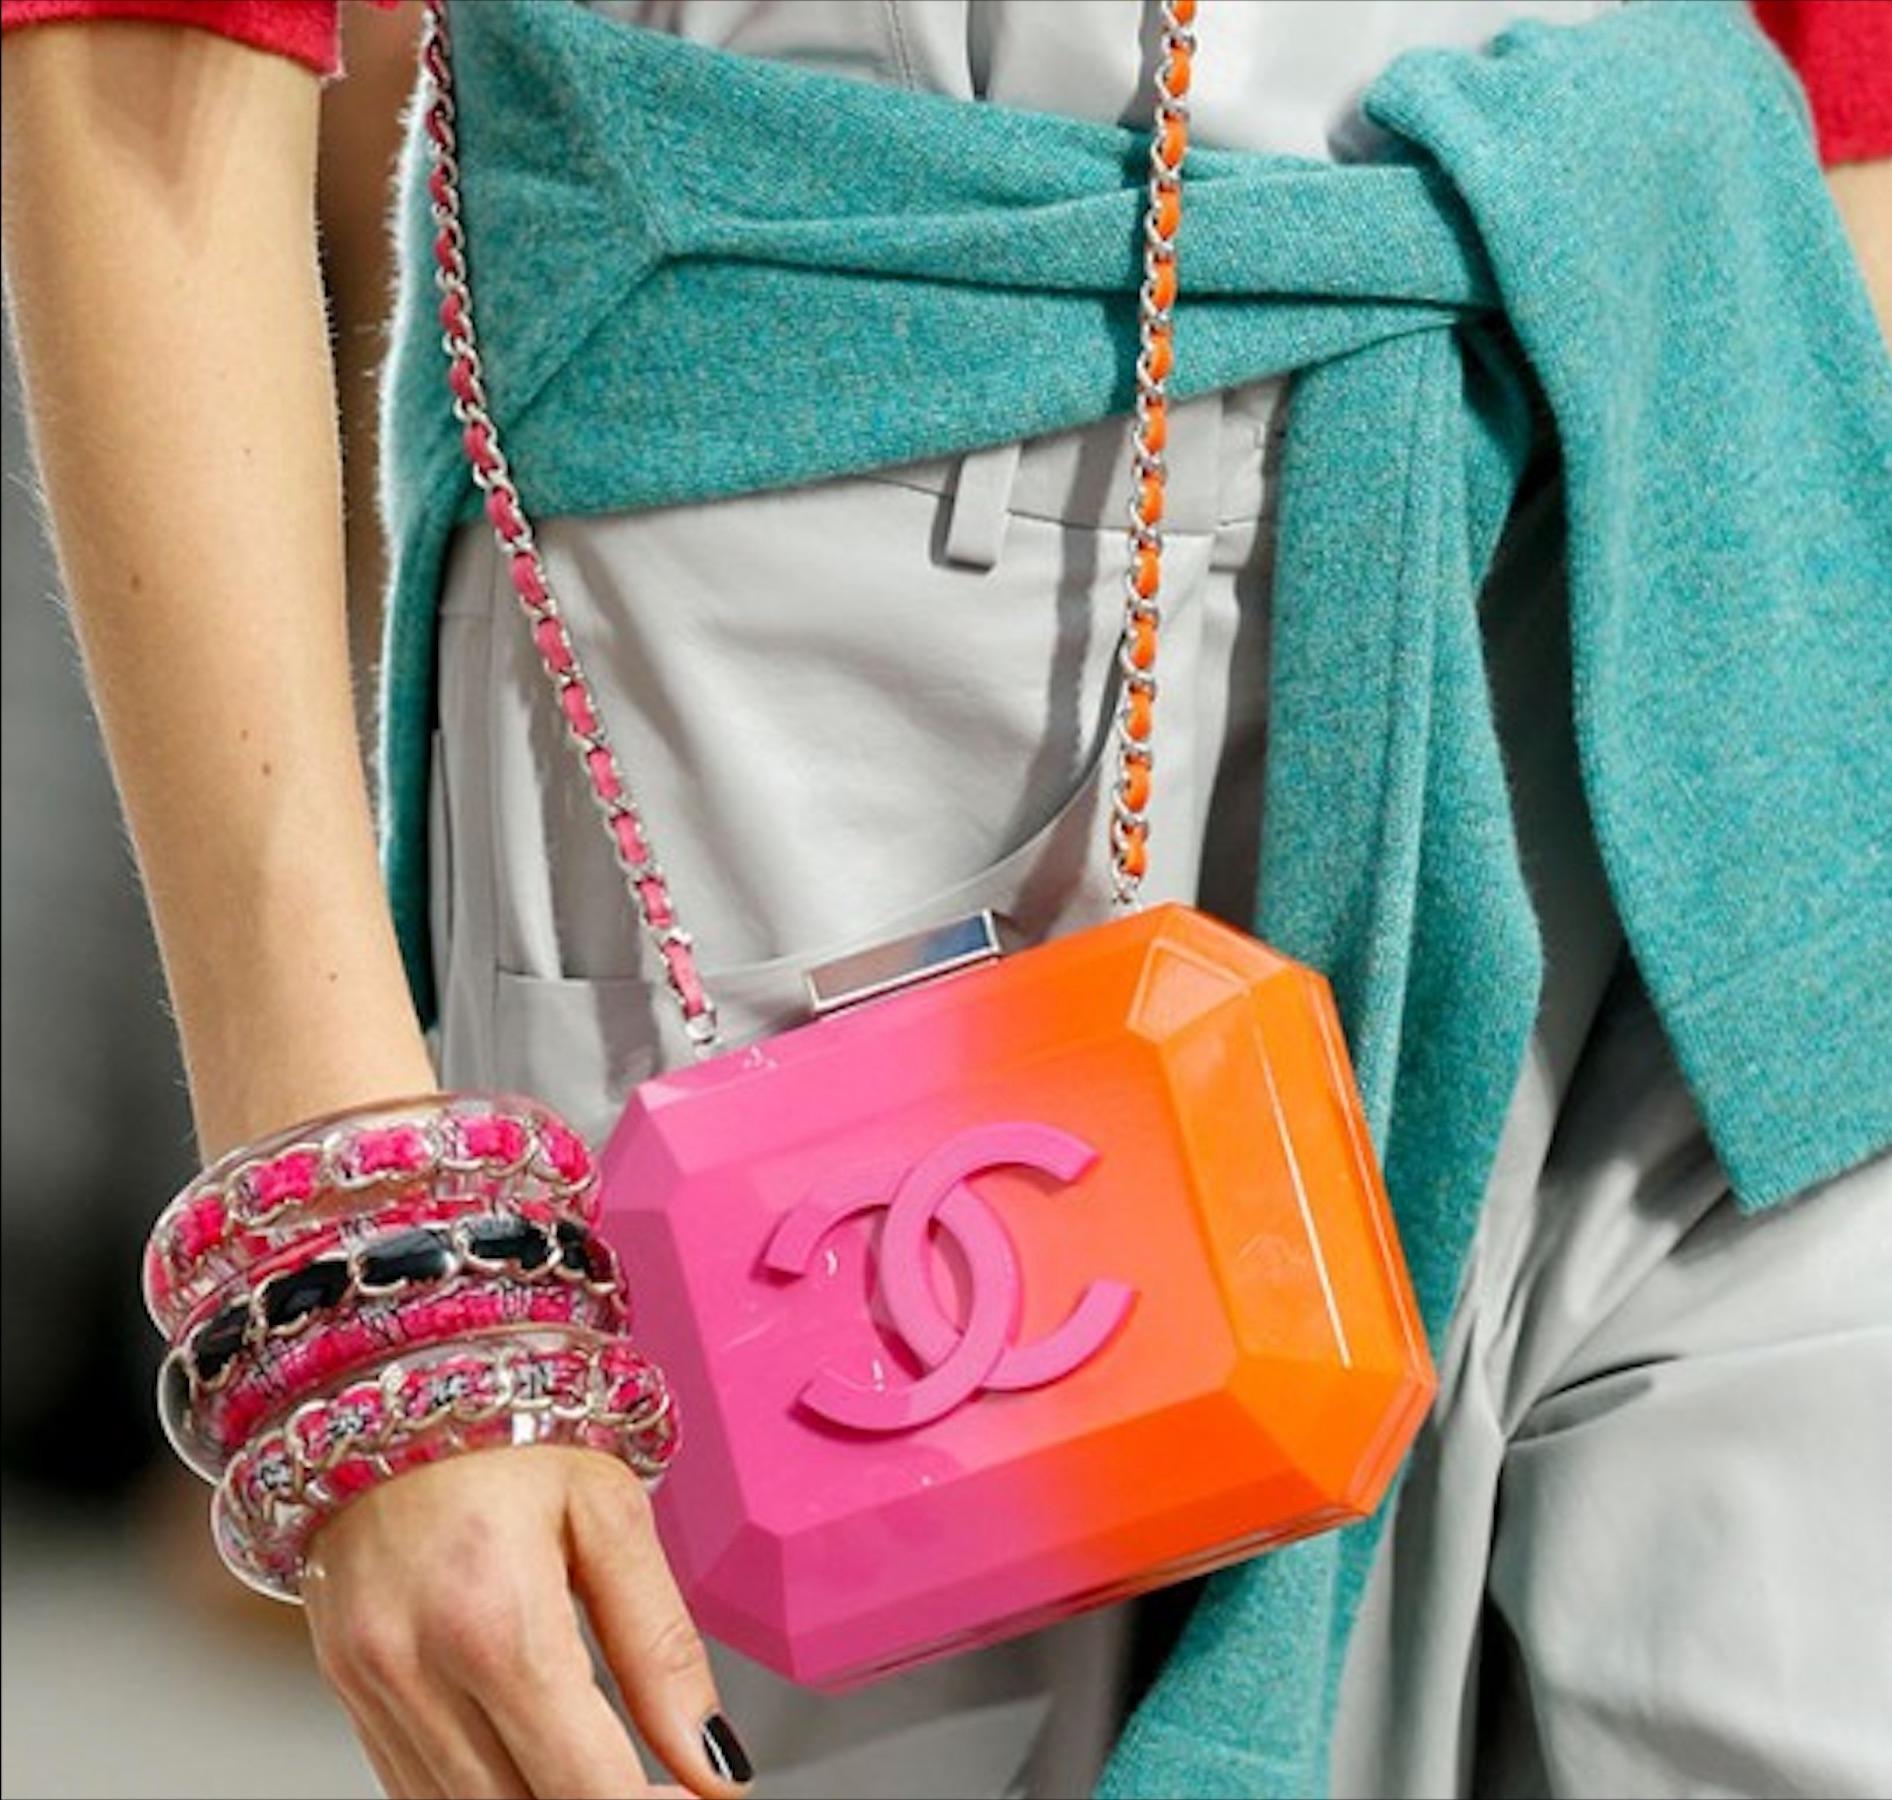 Chanel Pink Ombre Minaudiere Resin Plexiglass Brick Clutch Rare

Chanel Spring 2014

Silver hardware
Pink & orange interwoven leather chain
Pink leather lined interior
CC logo embossed at front
Push lock closure
W 6